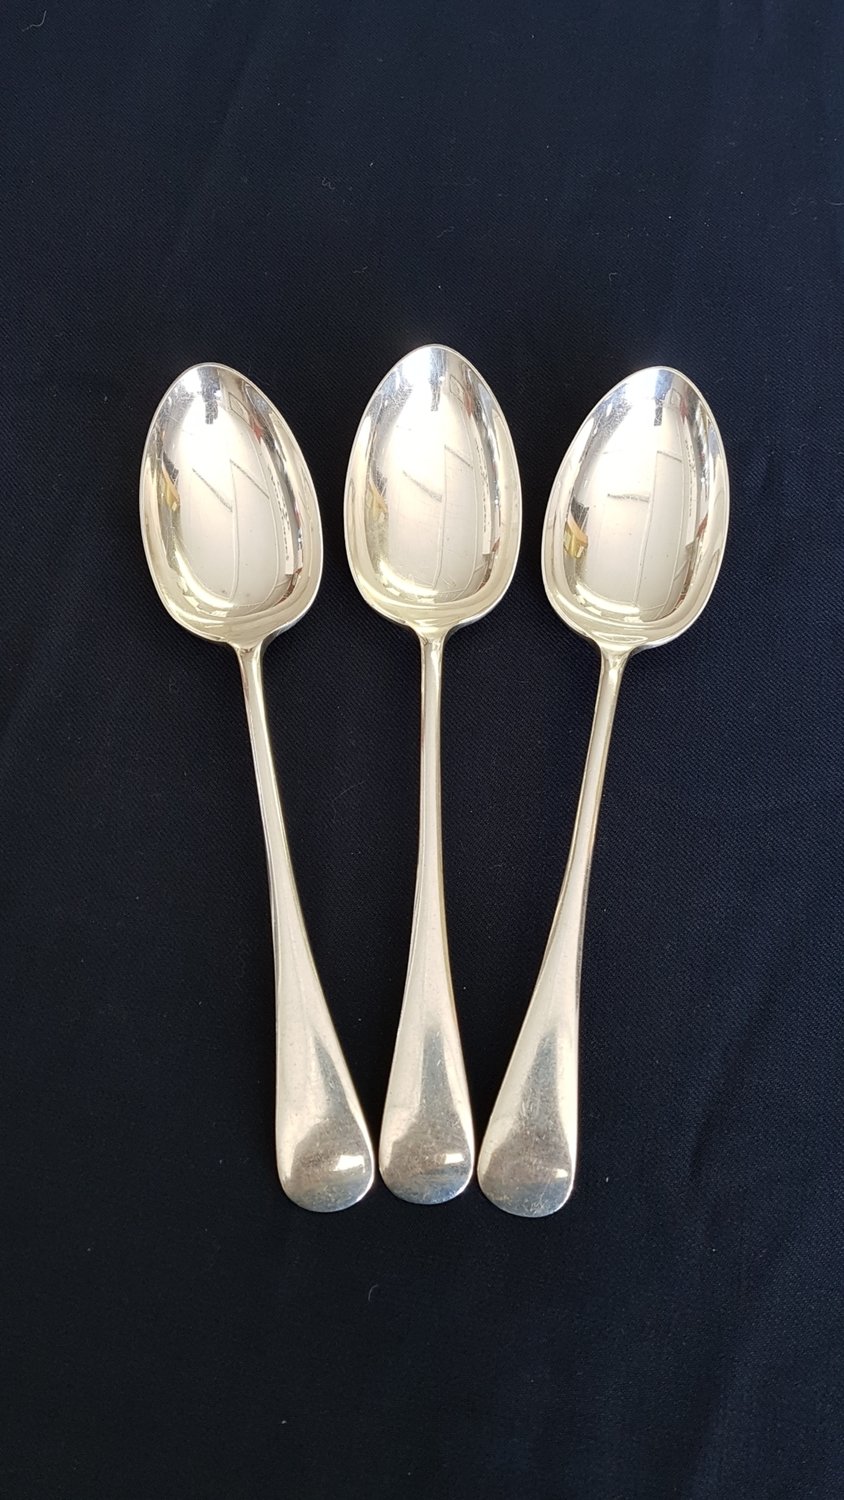 Solid Silver Serving Spoons- Sheffield 1936- Set of Three